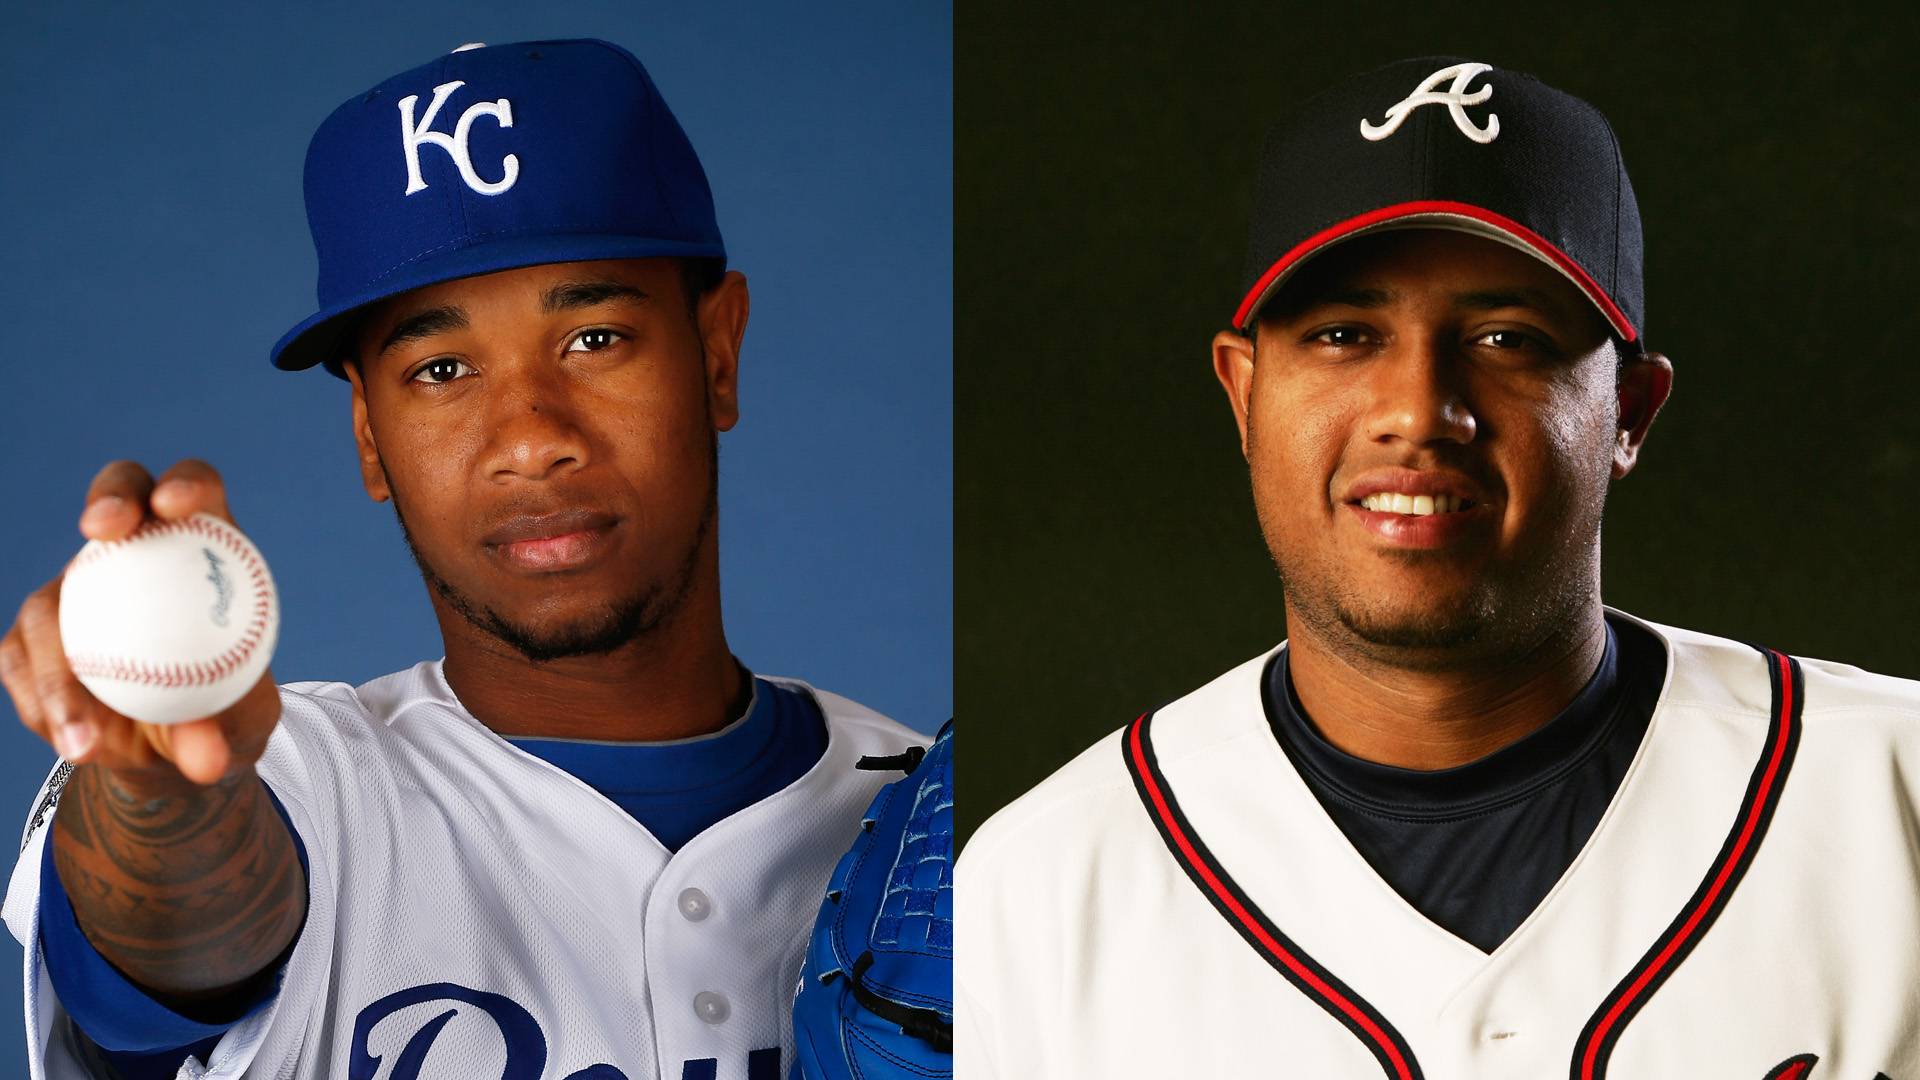 Yordano Ventura and Andy Marte killed in tragic car accidents